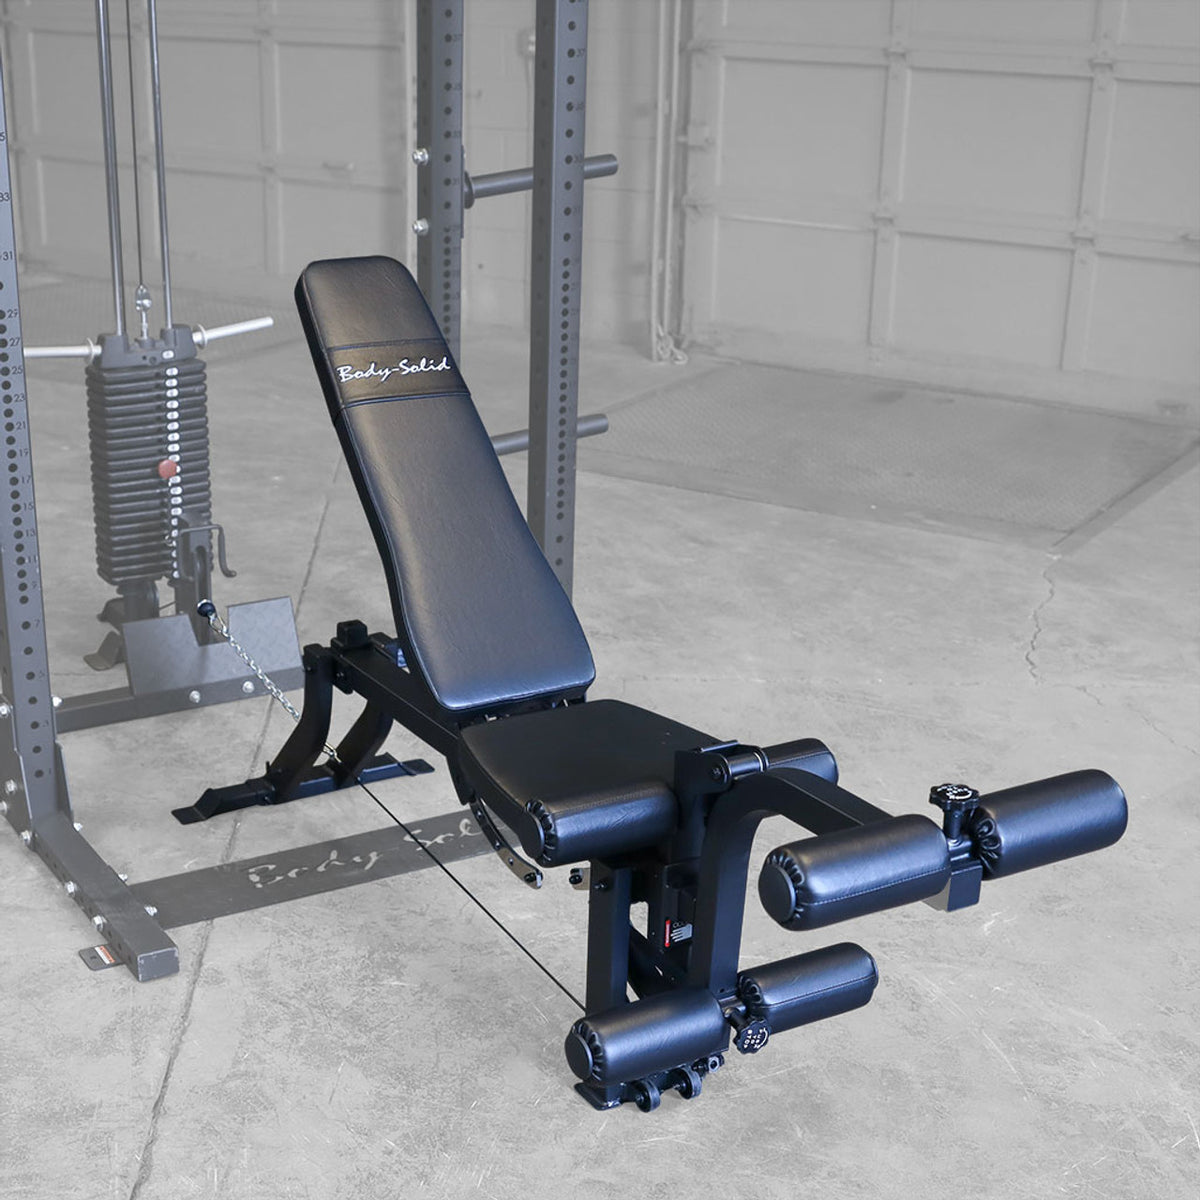 Body-Solid Leg Ext / Curl Bench Attachment